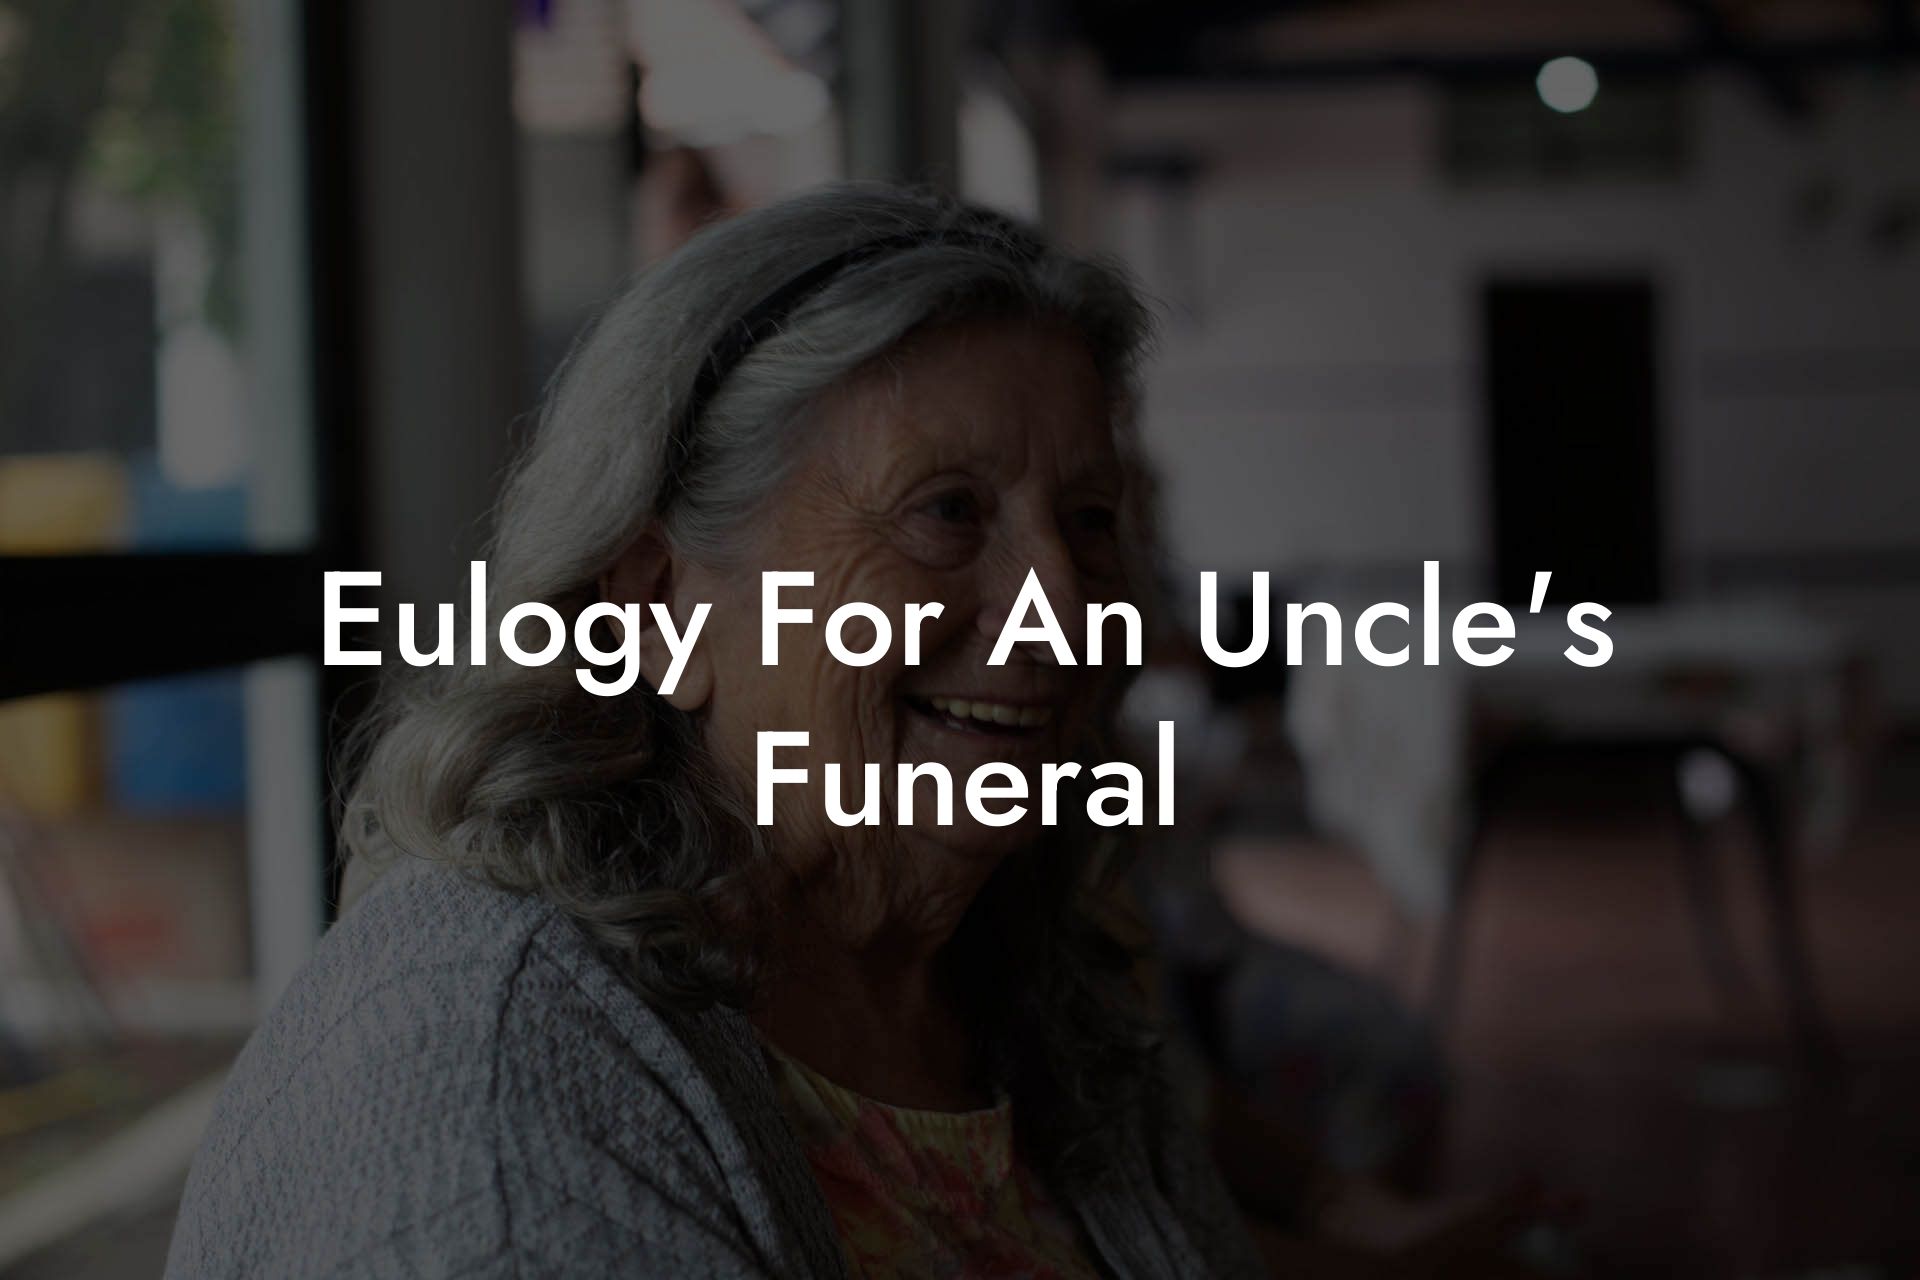 Eulogy For An Uncle's Funeral